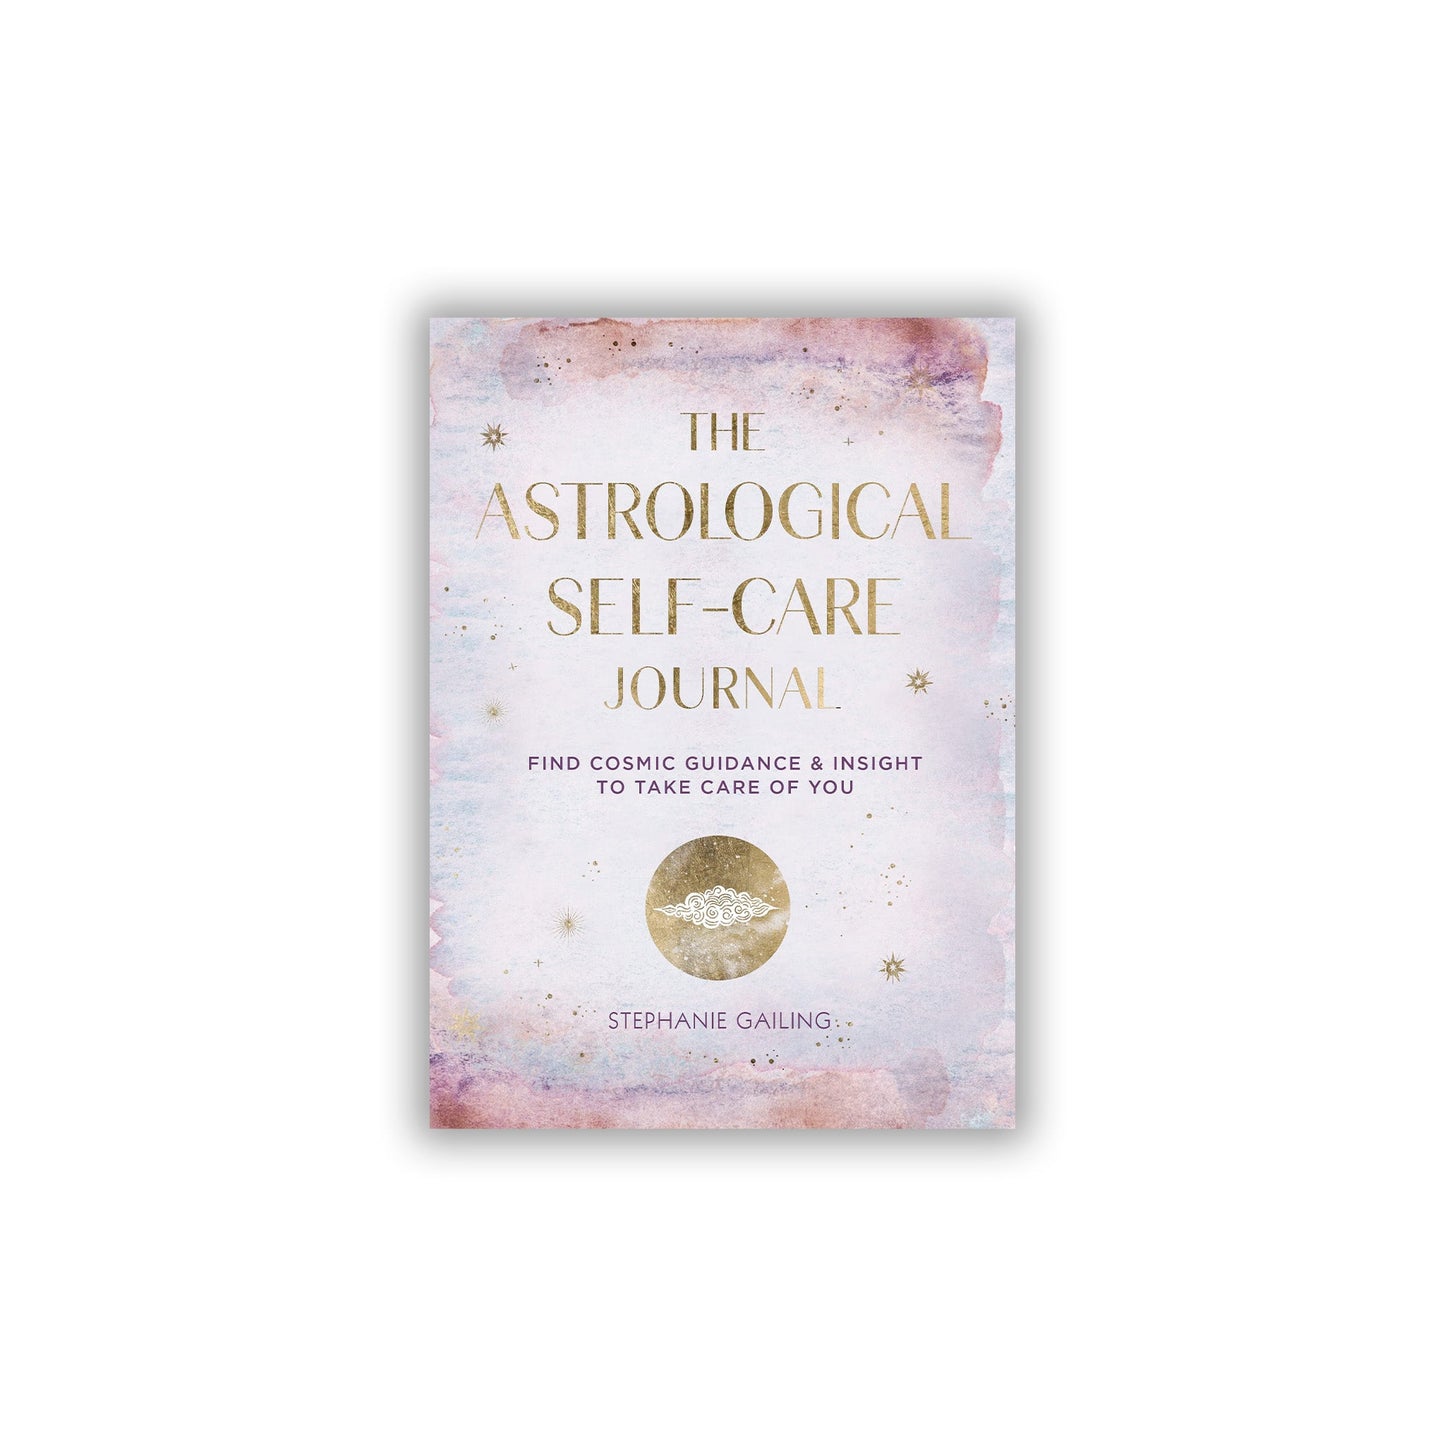 The Astrological Self-Care Journal: Find Cosmic Guidance & Insight to Take Care of You - Muse + Moonstone